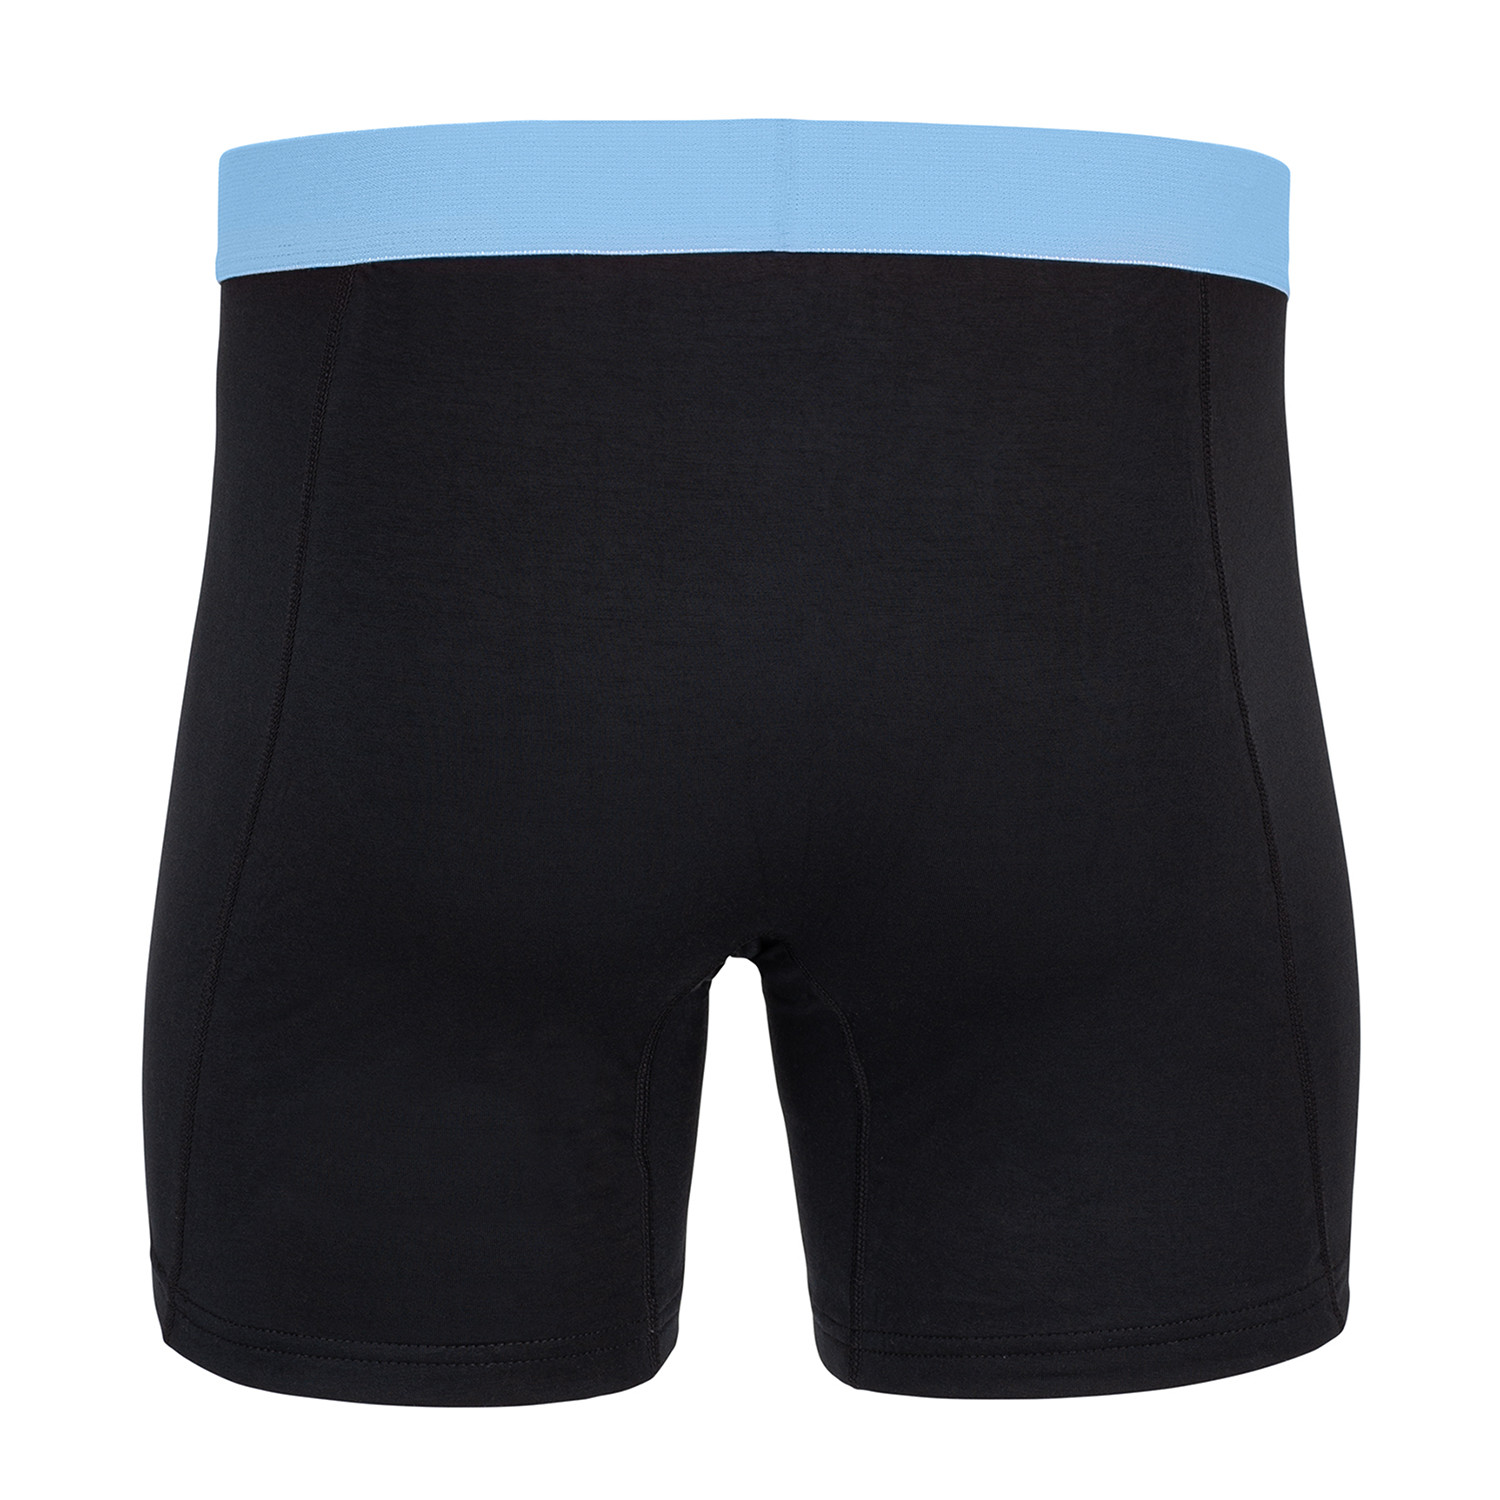 Sweat Proof Boxer Brief + Fly // Black + Blue (S) - Ejis - Touch of Modern